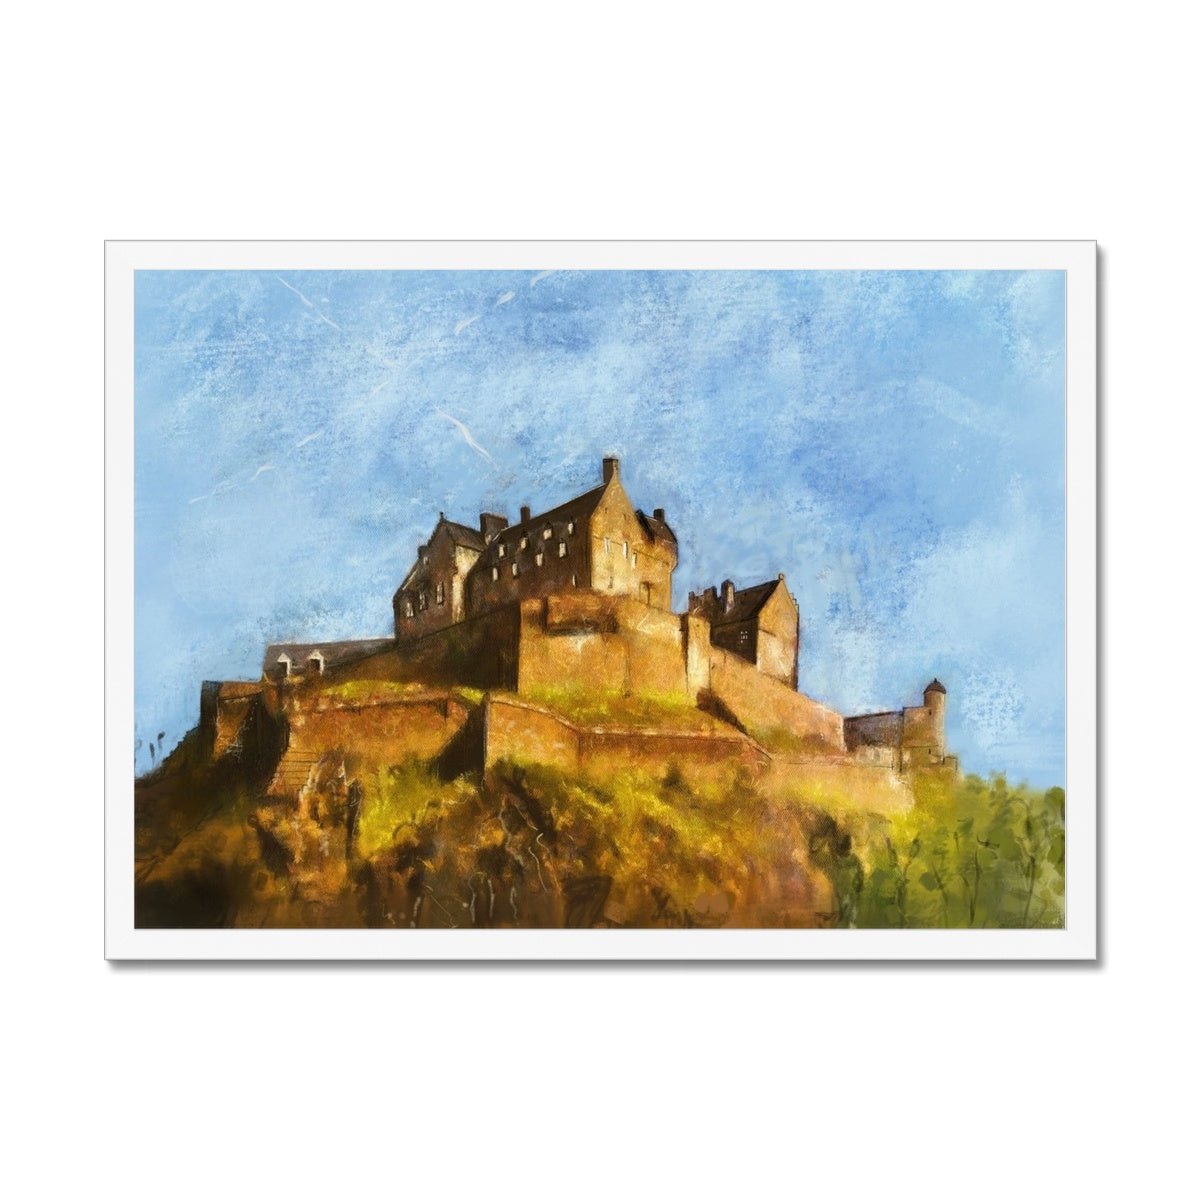 Edinburgh Castle Painting | Framed Prints From Scotland-Framed Prints-Historic & Iconic Scotland Art Gallery-A2 Landscape-White Frame-Paintings, Prints, Homeware, Art Gifts From Scotland By Scottish Artist Kevin Hunter